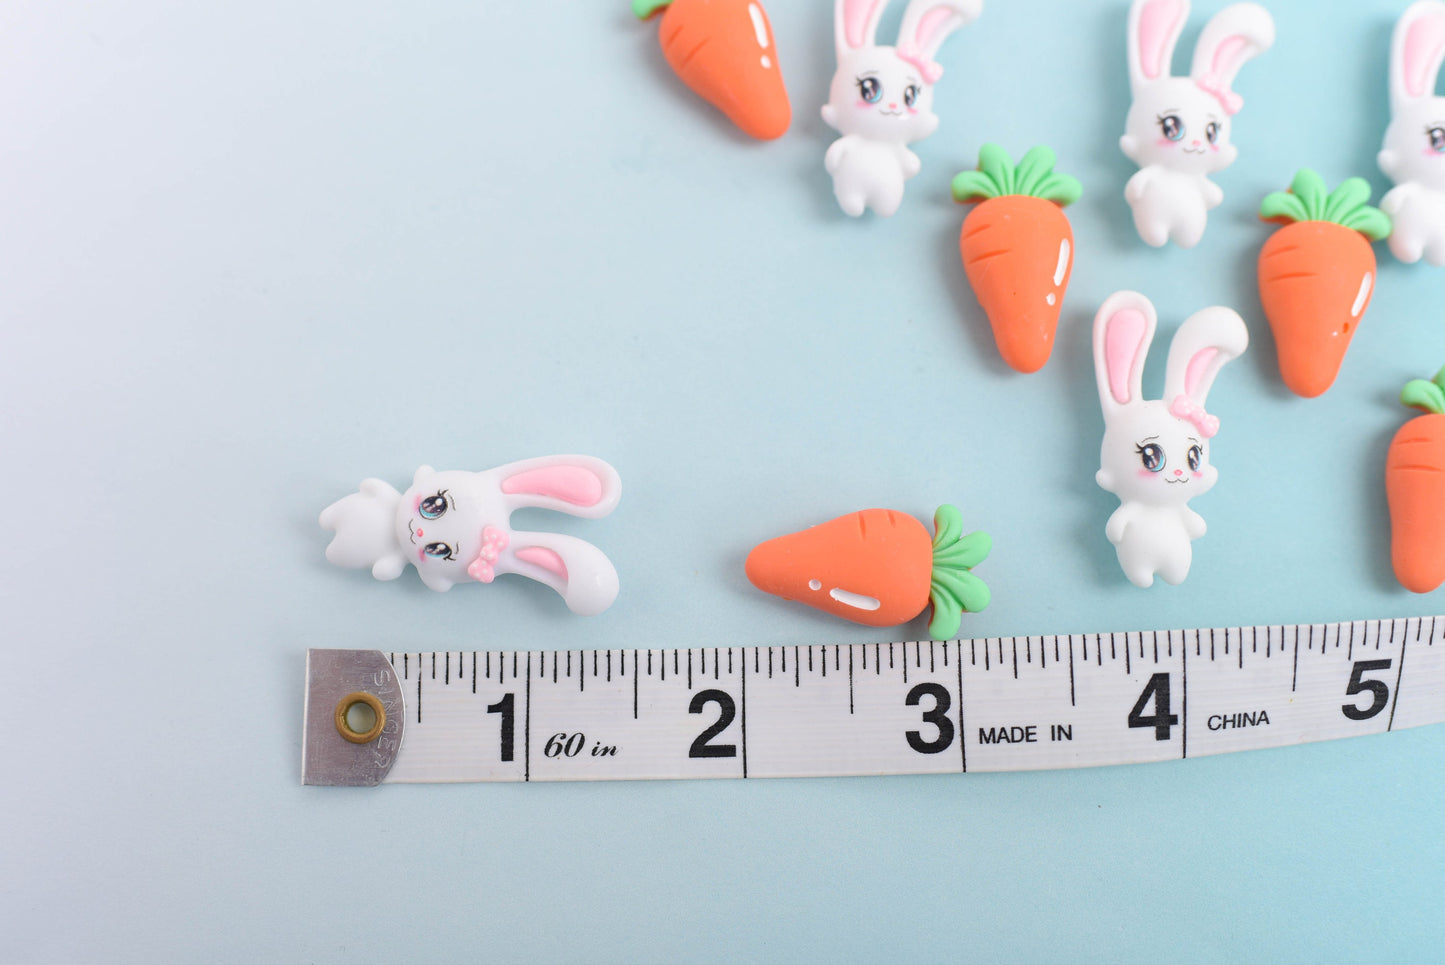 Cute Bunny Magnets with Option to add Resin Carrots- Set of 5 or 10